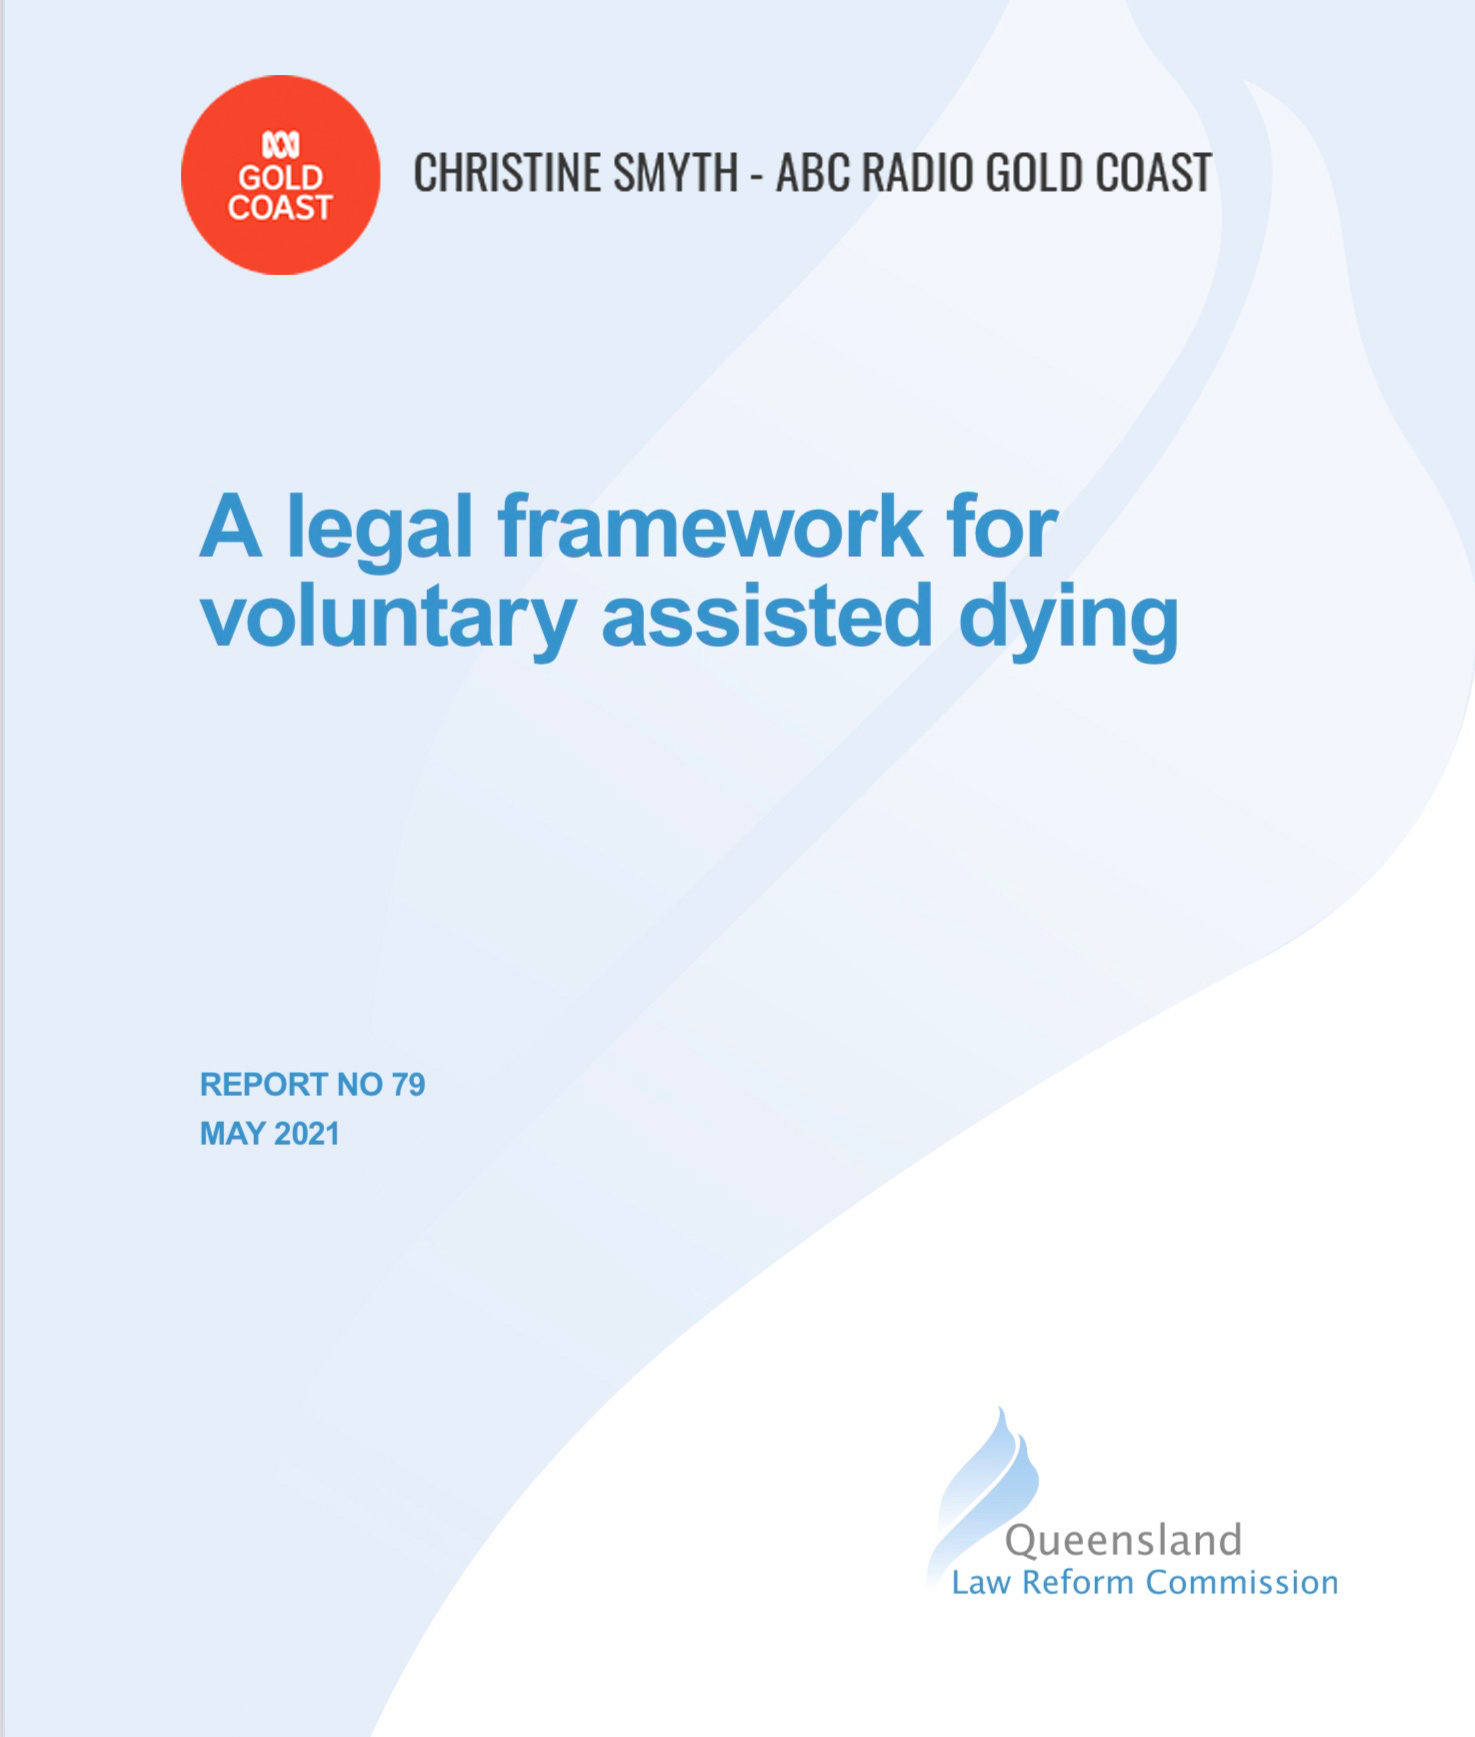 Voluntary Assisted Dying